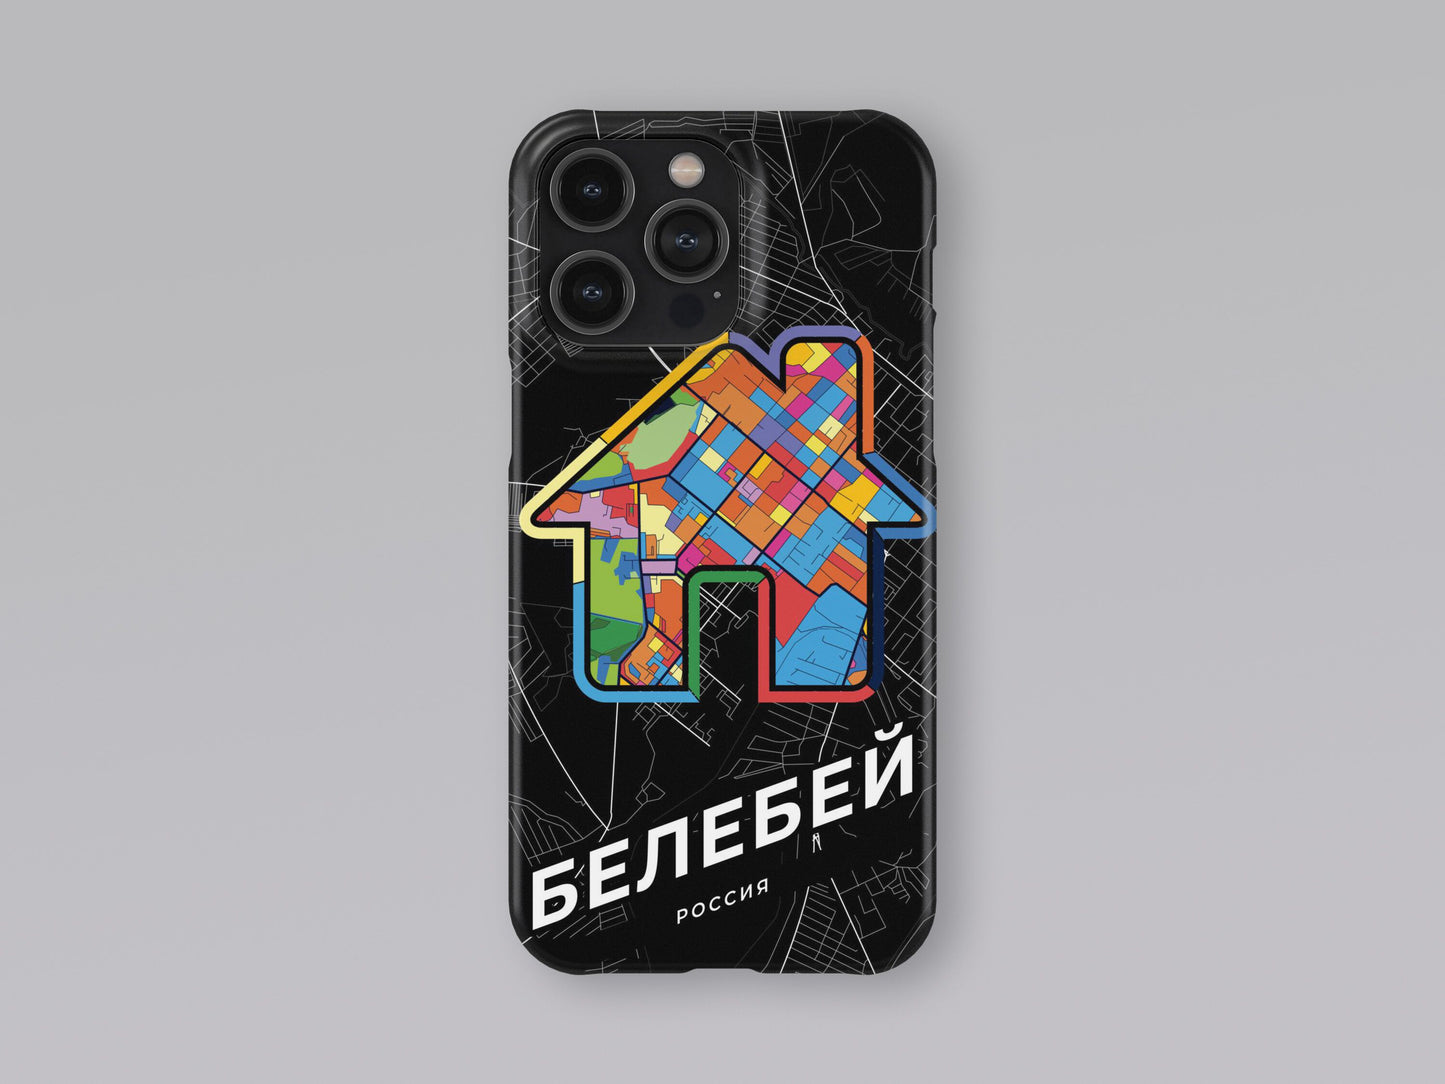 Belebey Russia slim phone case with colorful icon. Birthday, wedding or housewarming gift. Couple match cases. 3